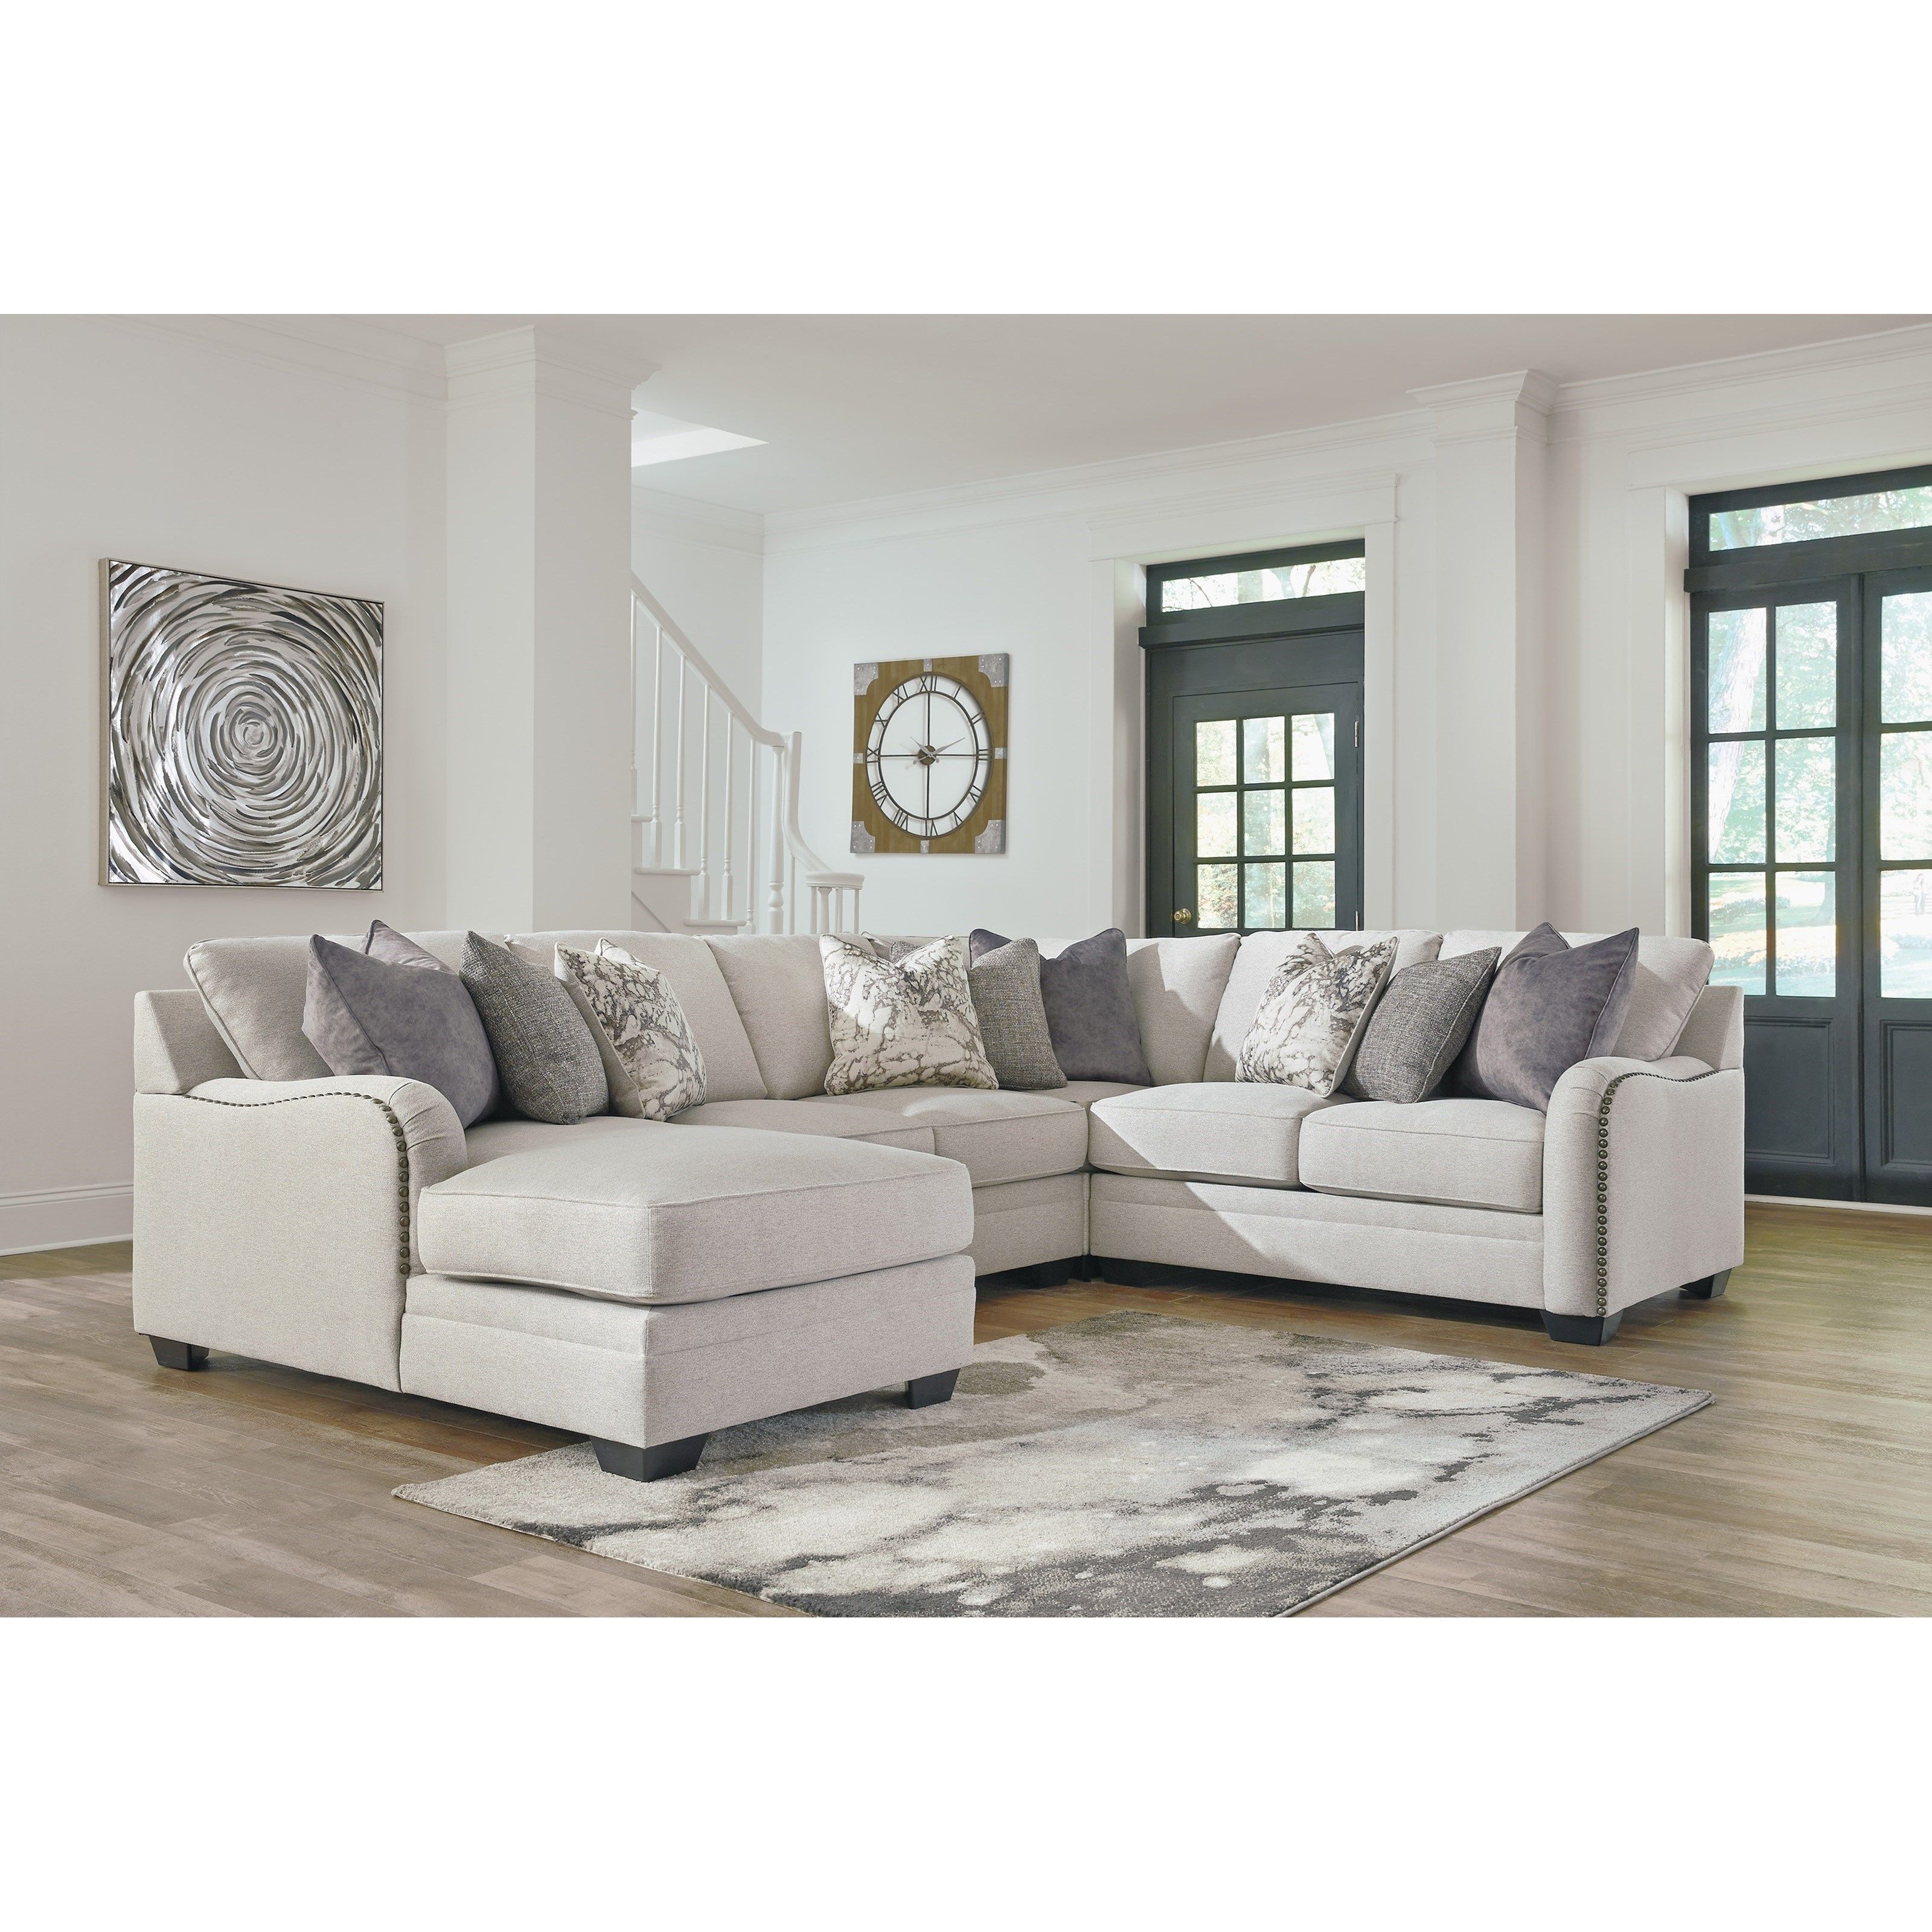 Dellara Casual 4 Piece Sectional With Left Chaise | Becker Furniture Intended For Blaine 3 Piece Sectionals (View 4 of 25)